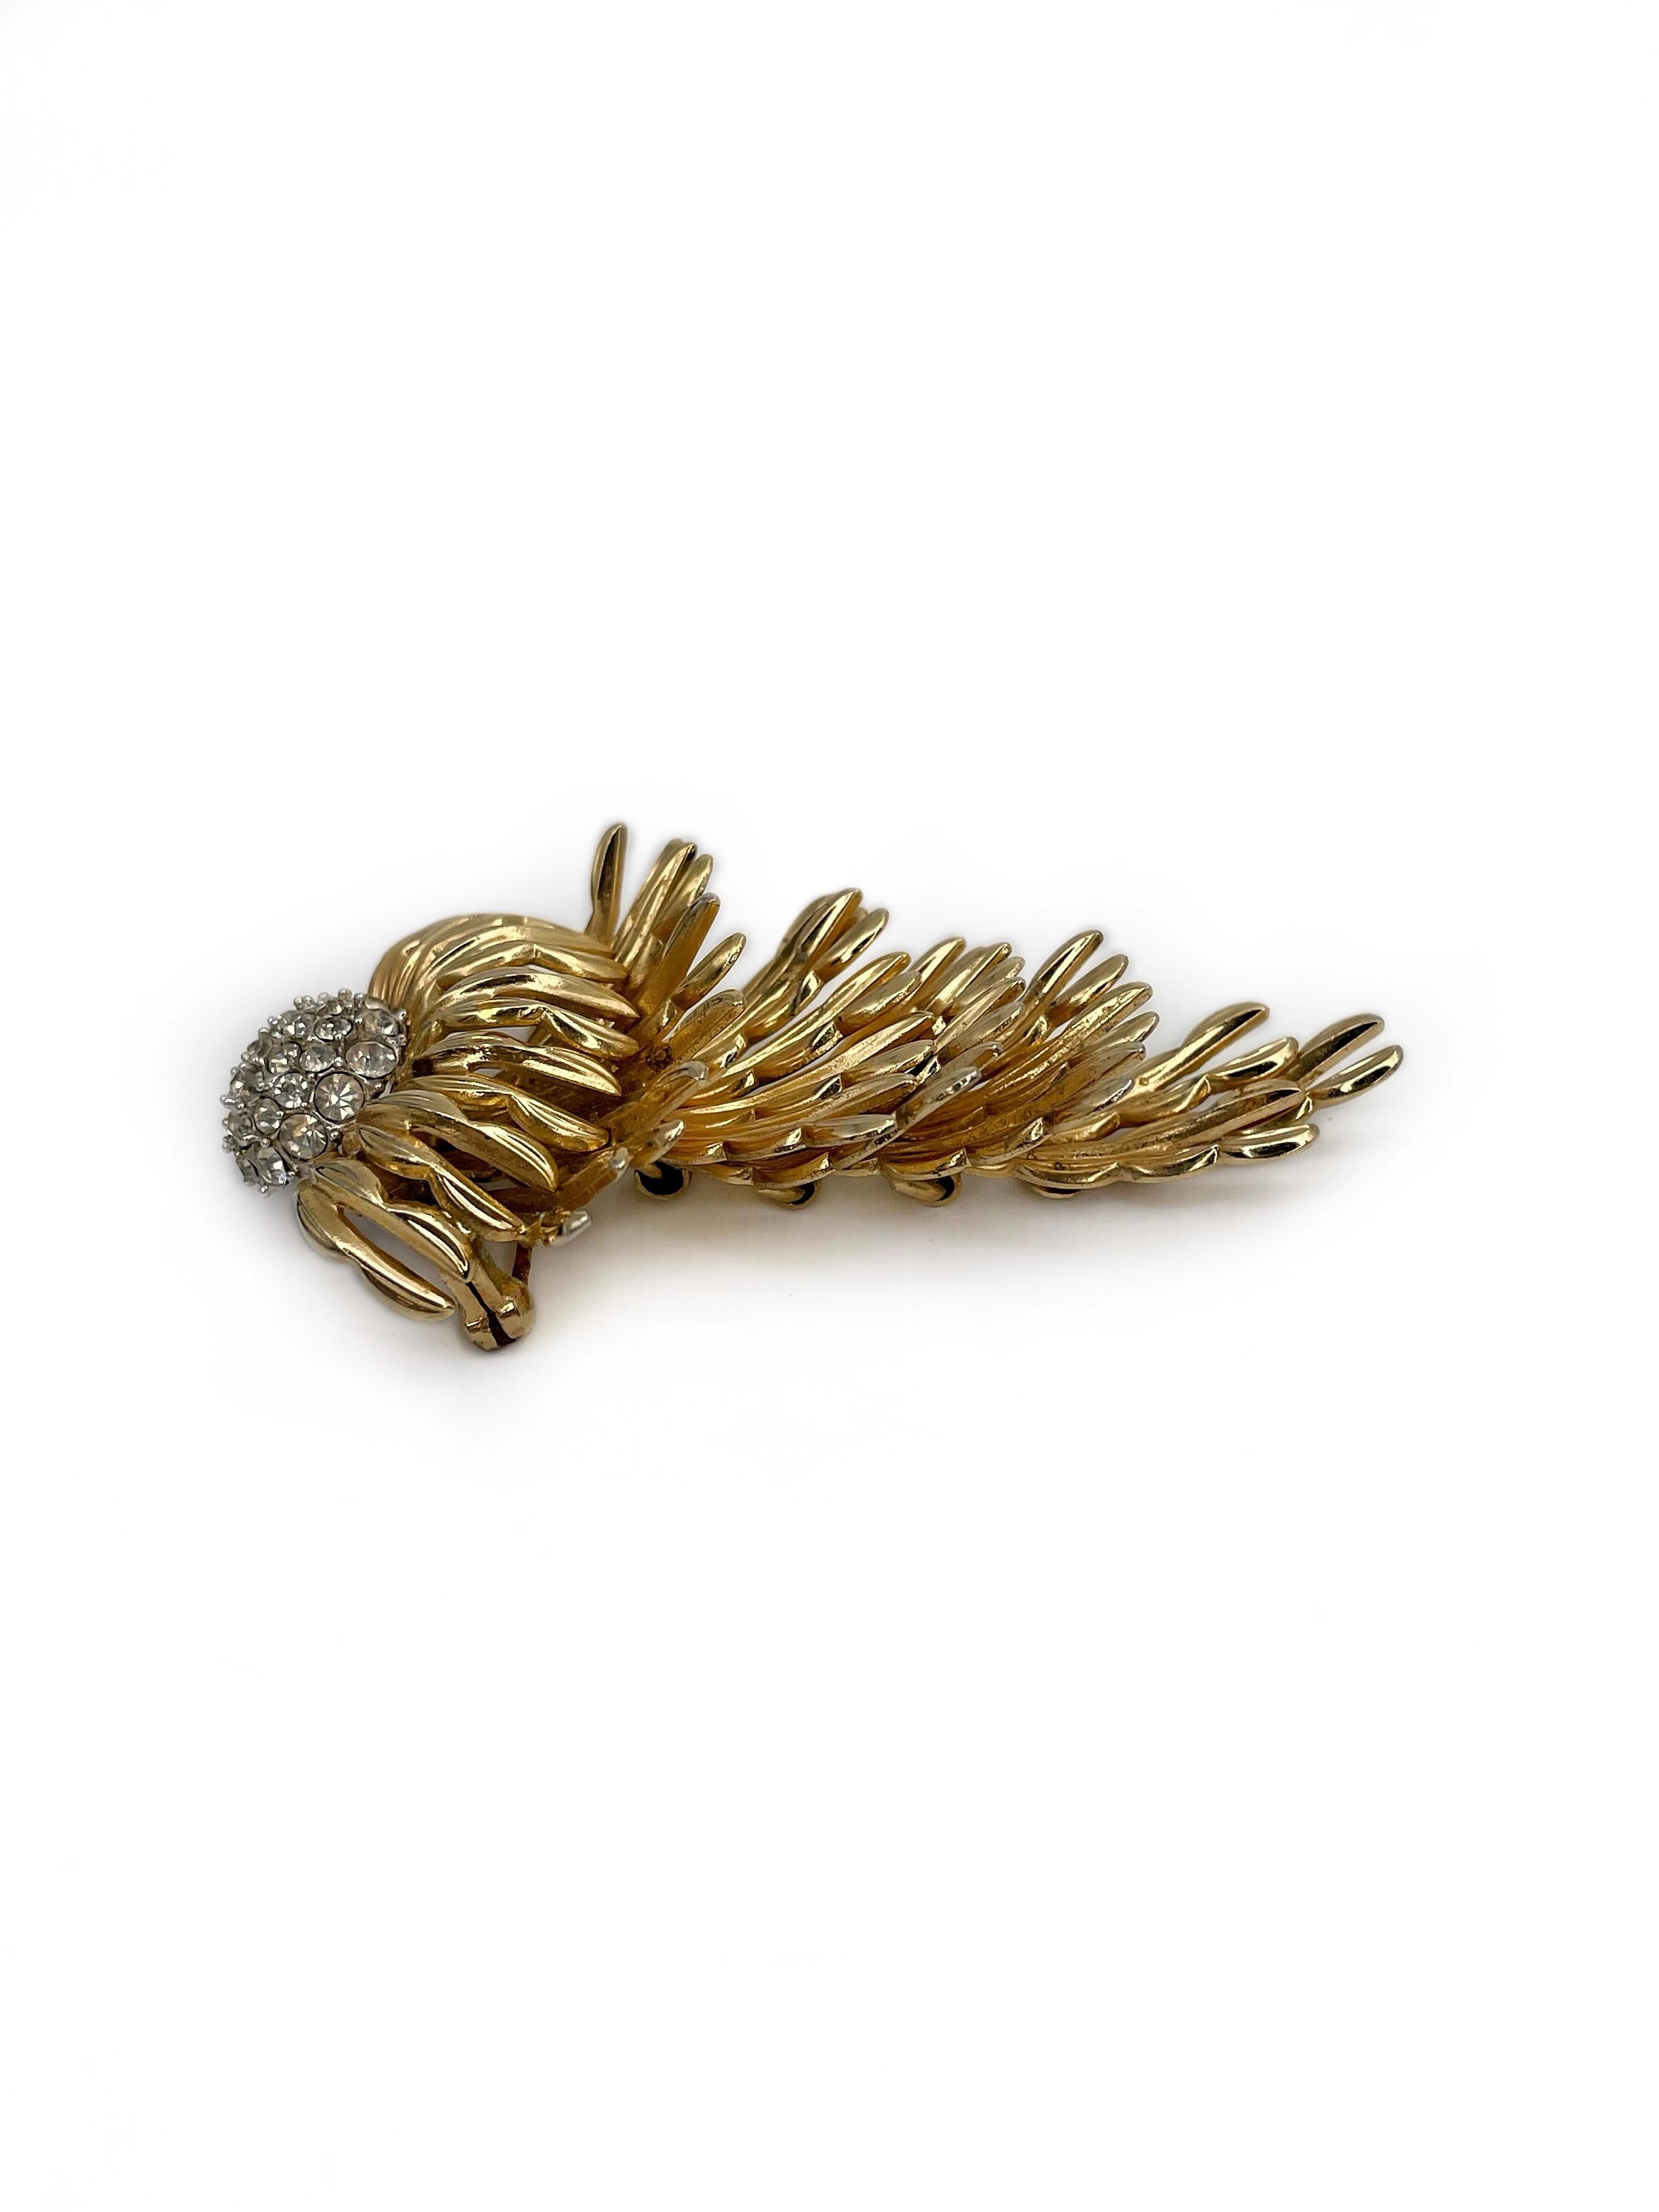 This is an adorable cascading vintage pin brooch designed by Grosse in 1965. This piece is gold plated and adorned with clear rhinestones. 

Markings: “Grosse© - 1965 - Germany” (shown in photos).

Size: 7x3.5cm

———

If you have any questions,